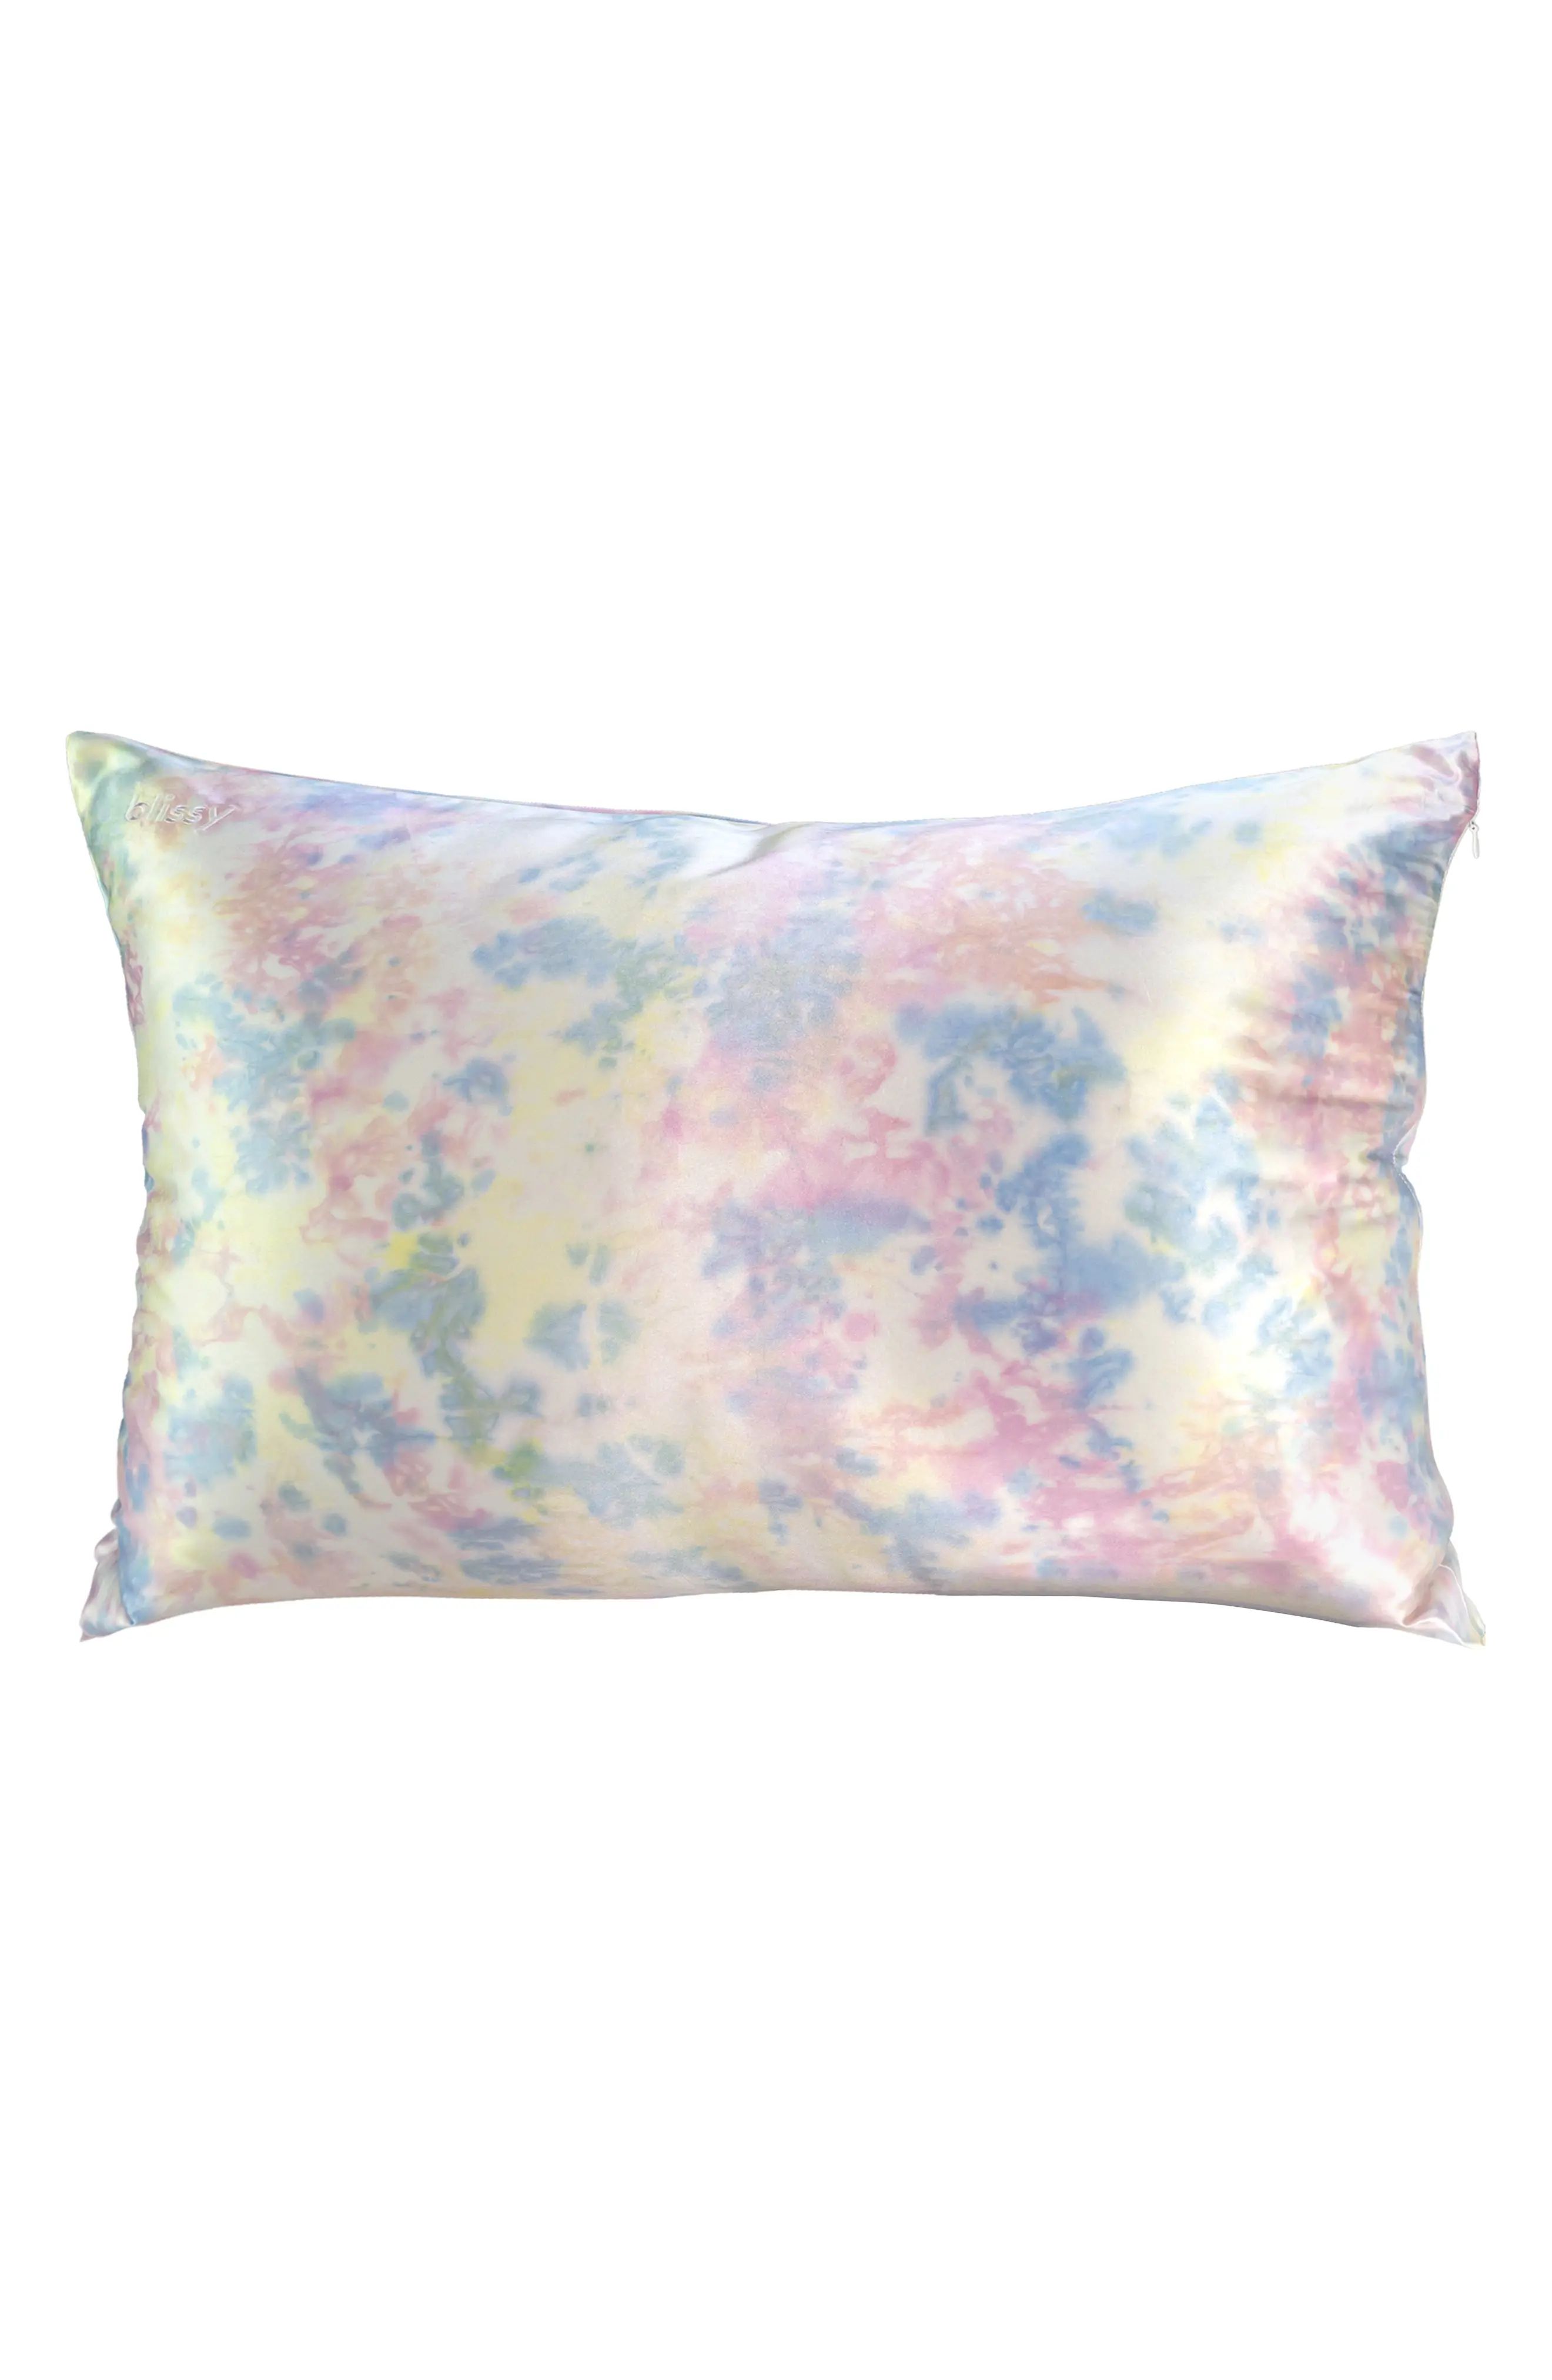 BLISSY Mulberry Silk Pillowcase in Yellow Tie Dye at Nordstrom, Size Queen | Nordstrom